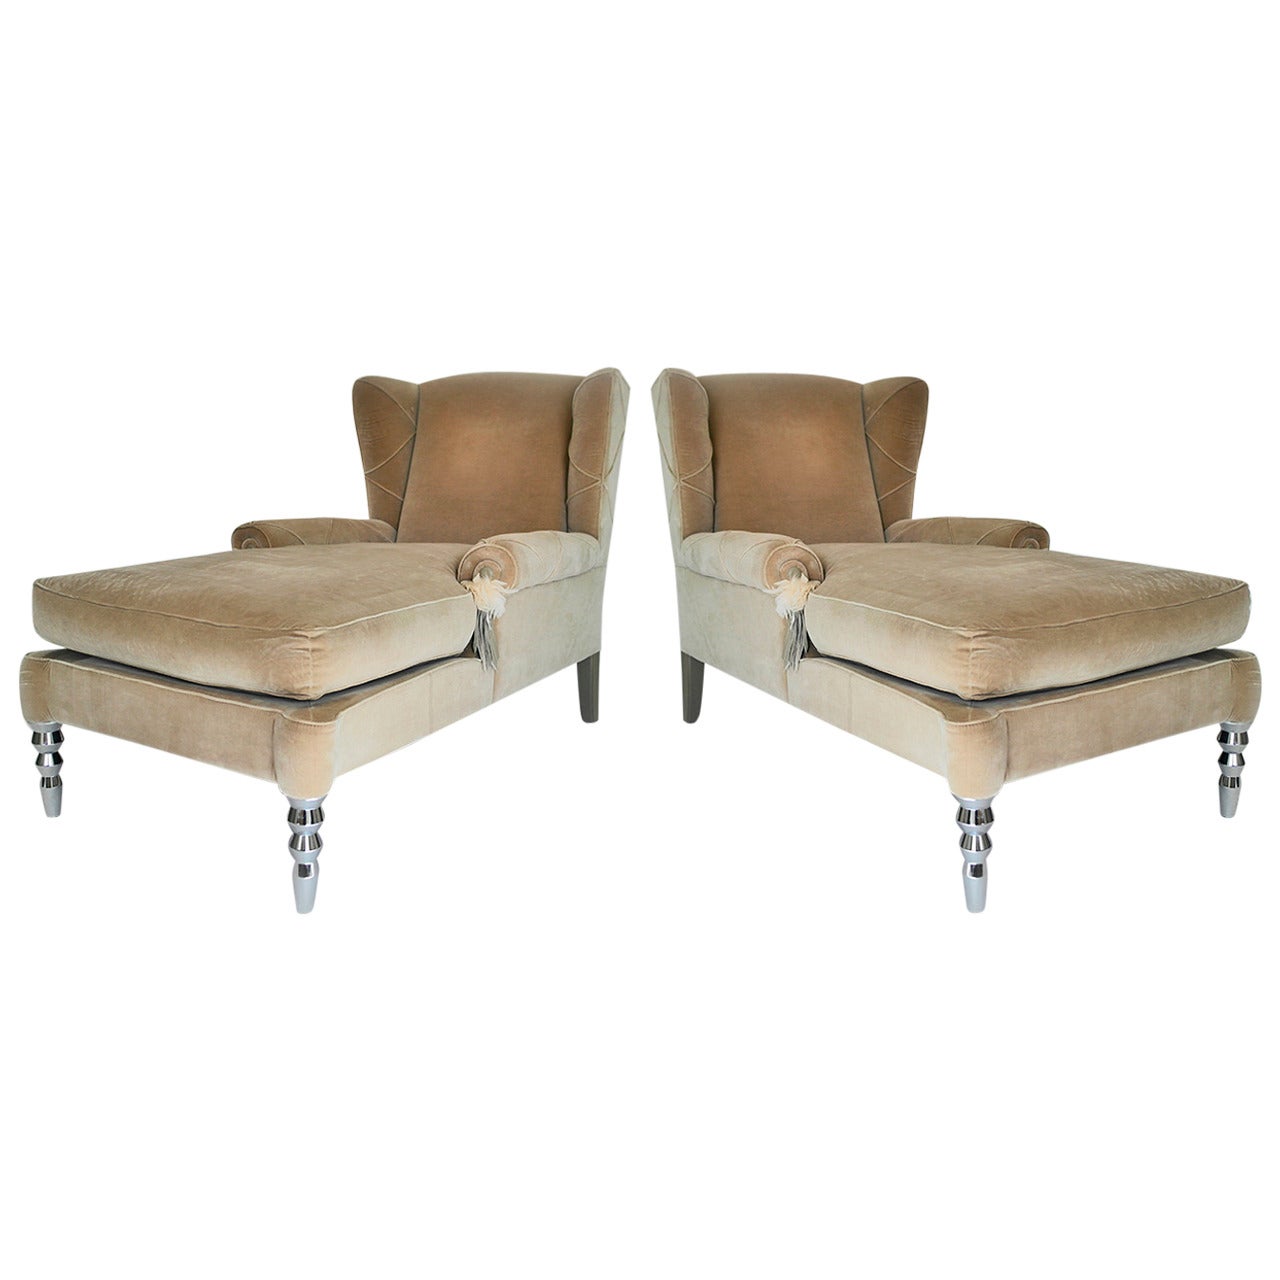 Pair of Roberto Cavalli Chaise Day Bed Wingback Chairs For Sale